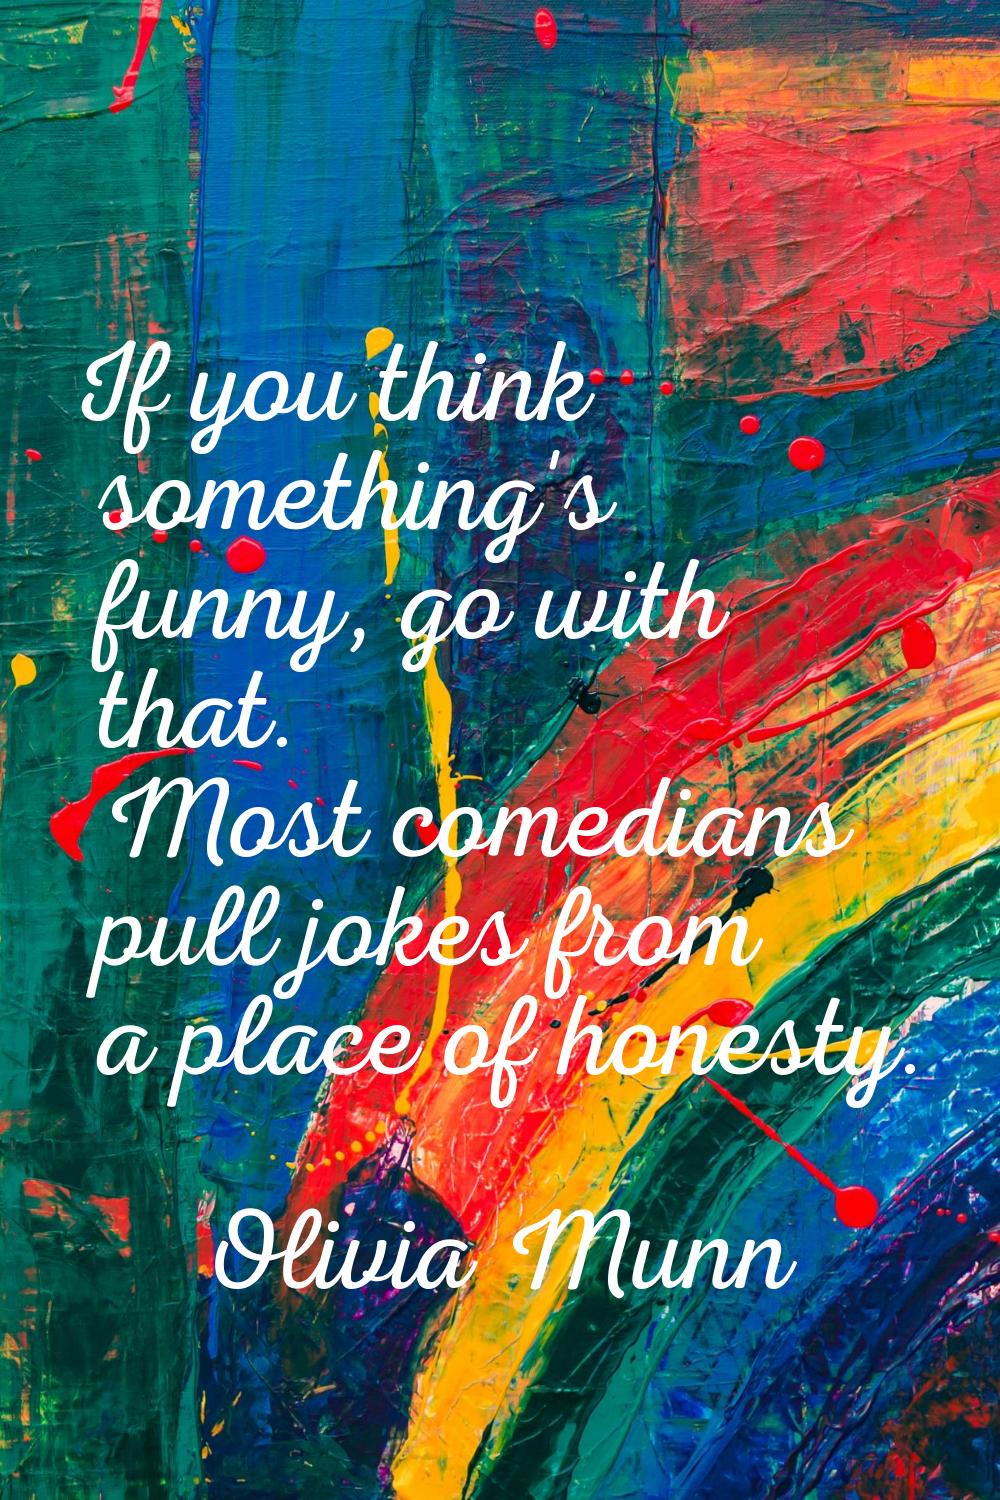 If you think something's funny, go with that. Most comedians pull jokes from a place of honesty.